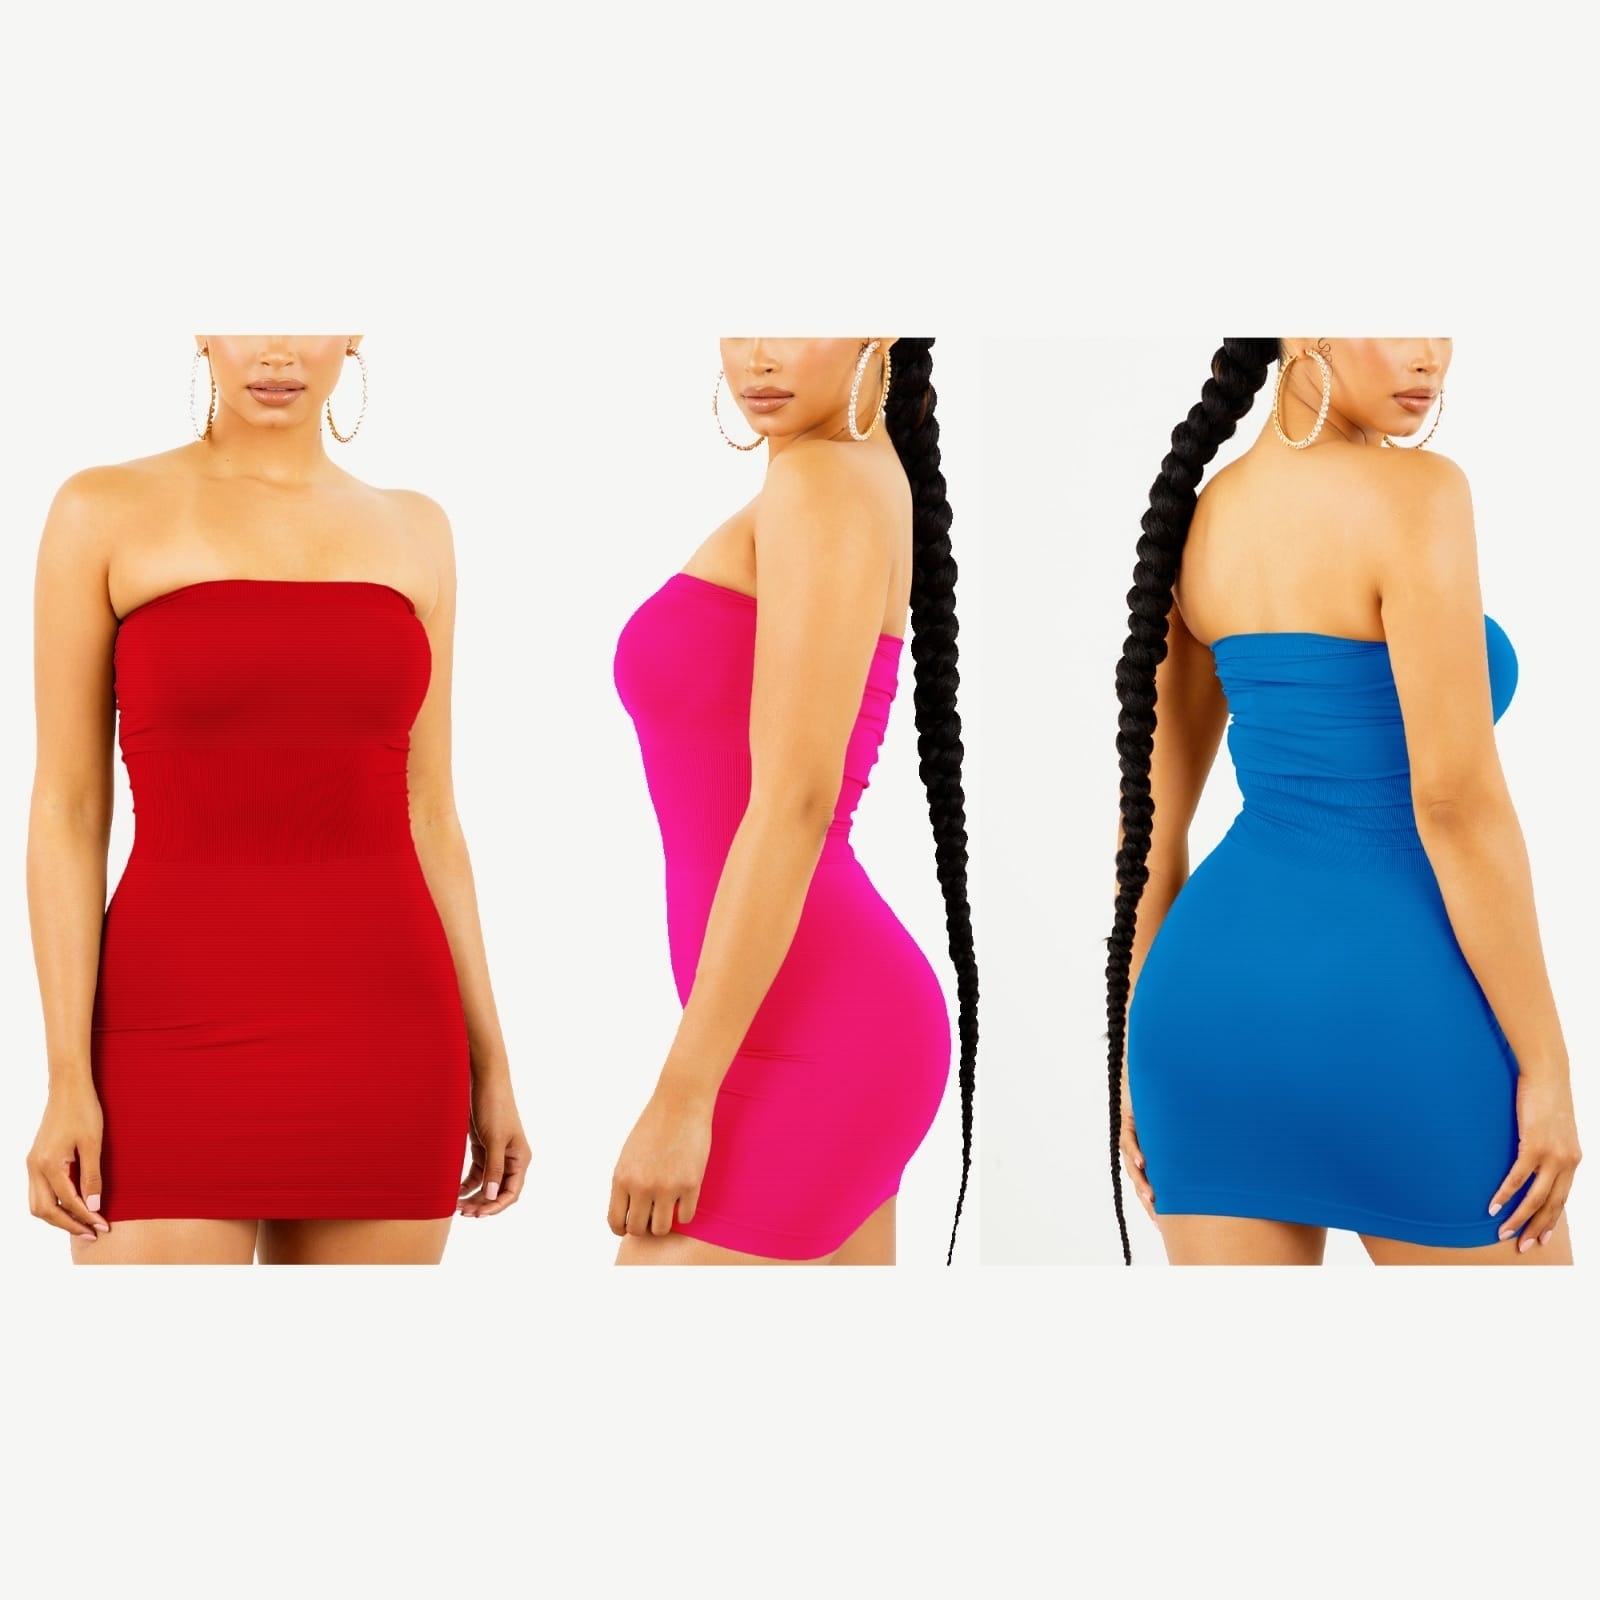 3-Pack Women's Strapless Stretchy Seamless Tight Fit Body Con Mini Tube Top Dress - RED, XS